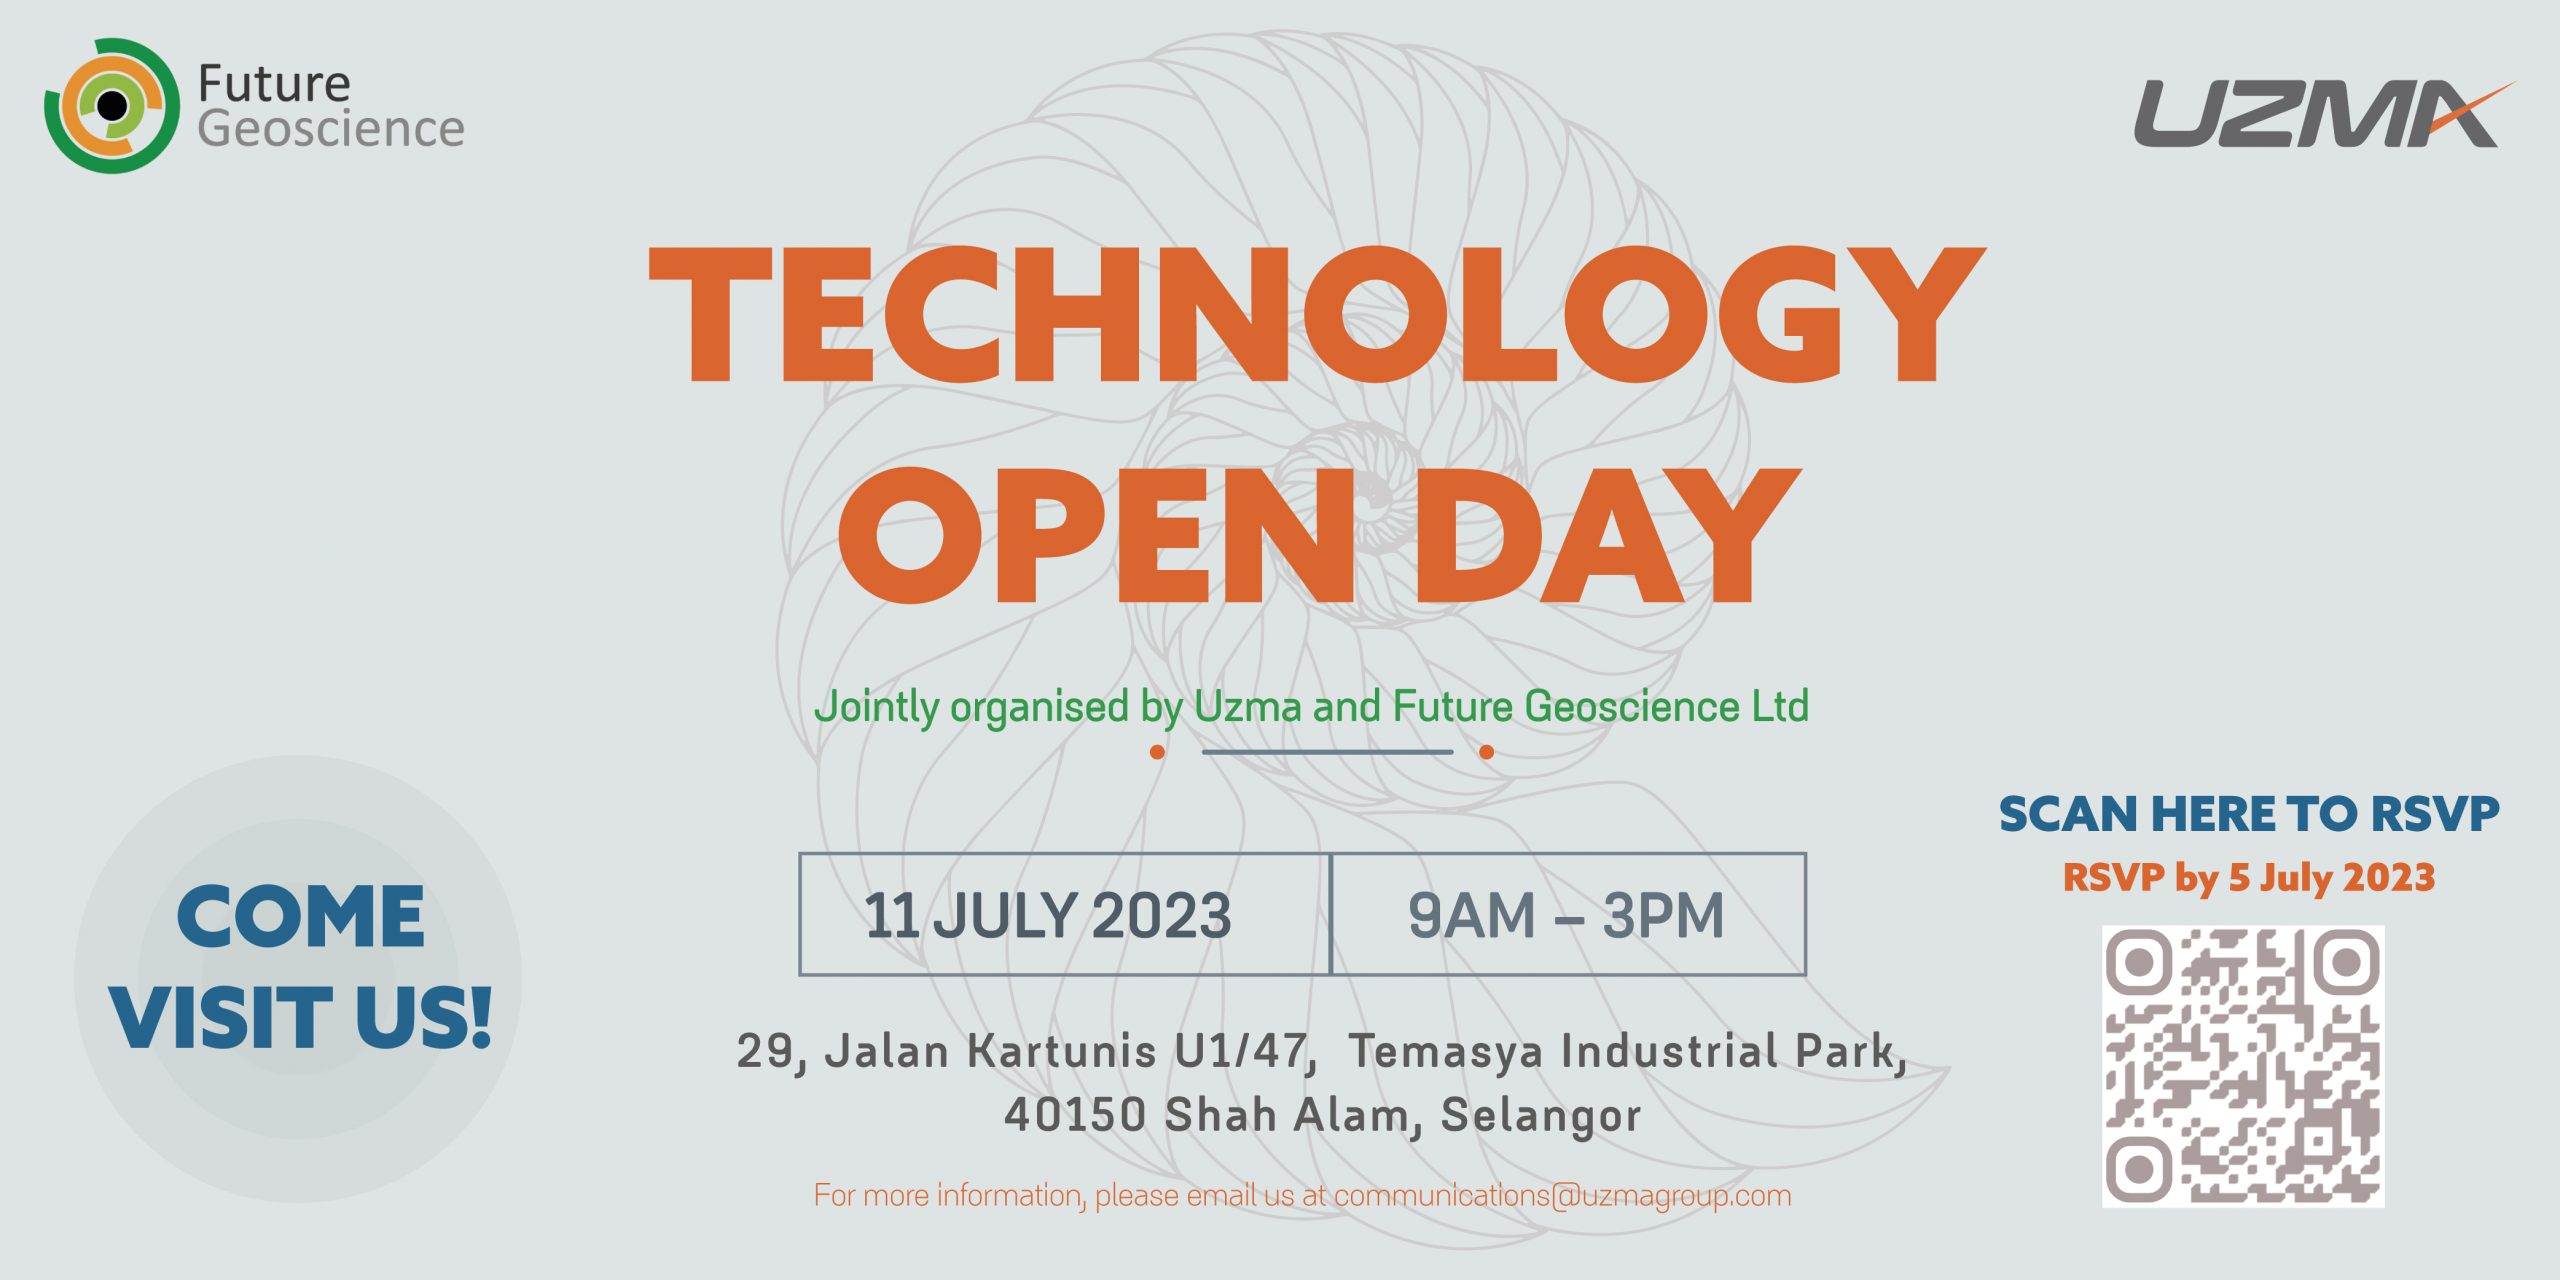 Future Geoscience and Uzma invite you to our Technology Open Day